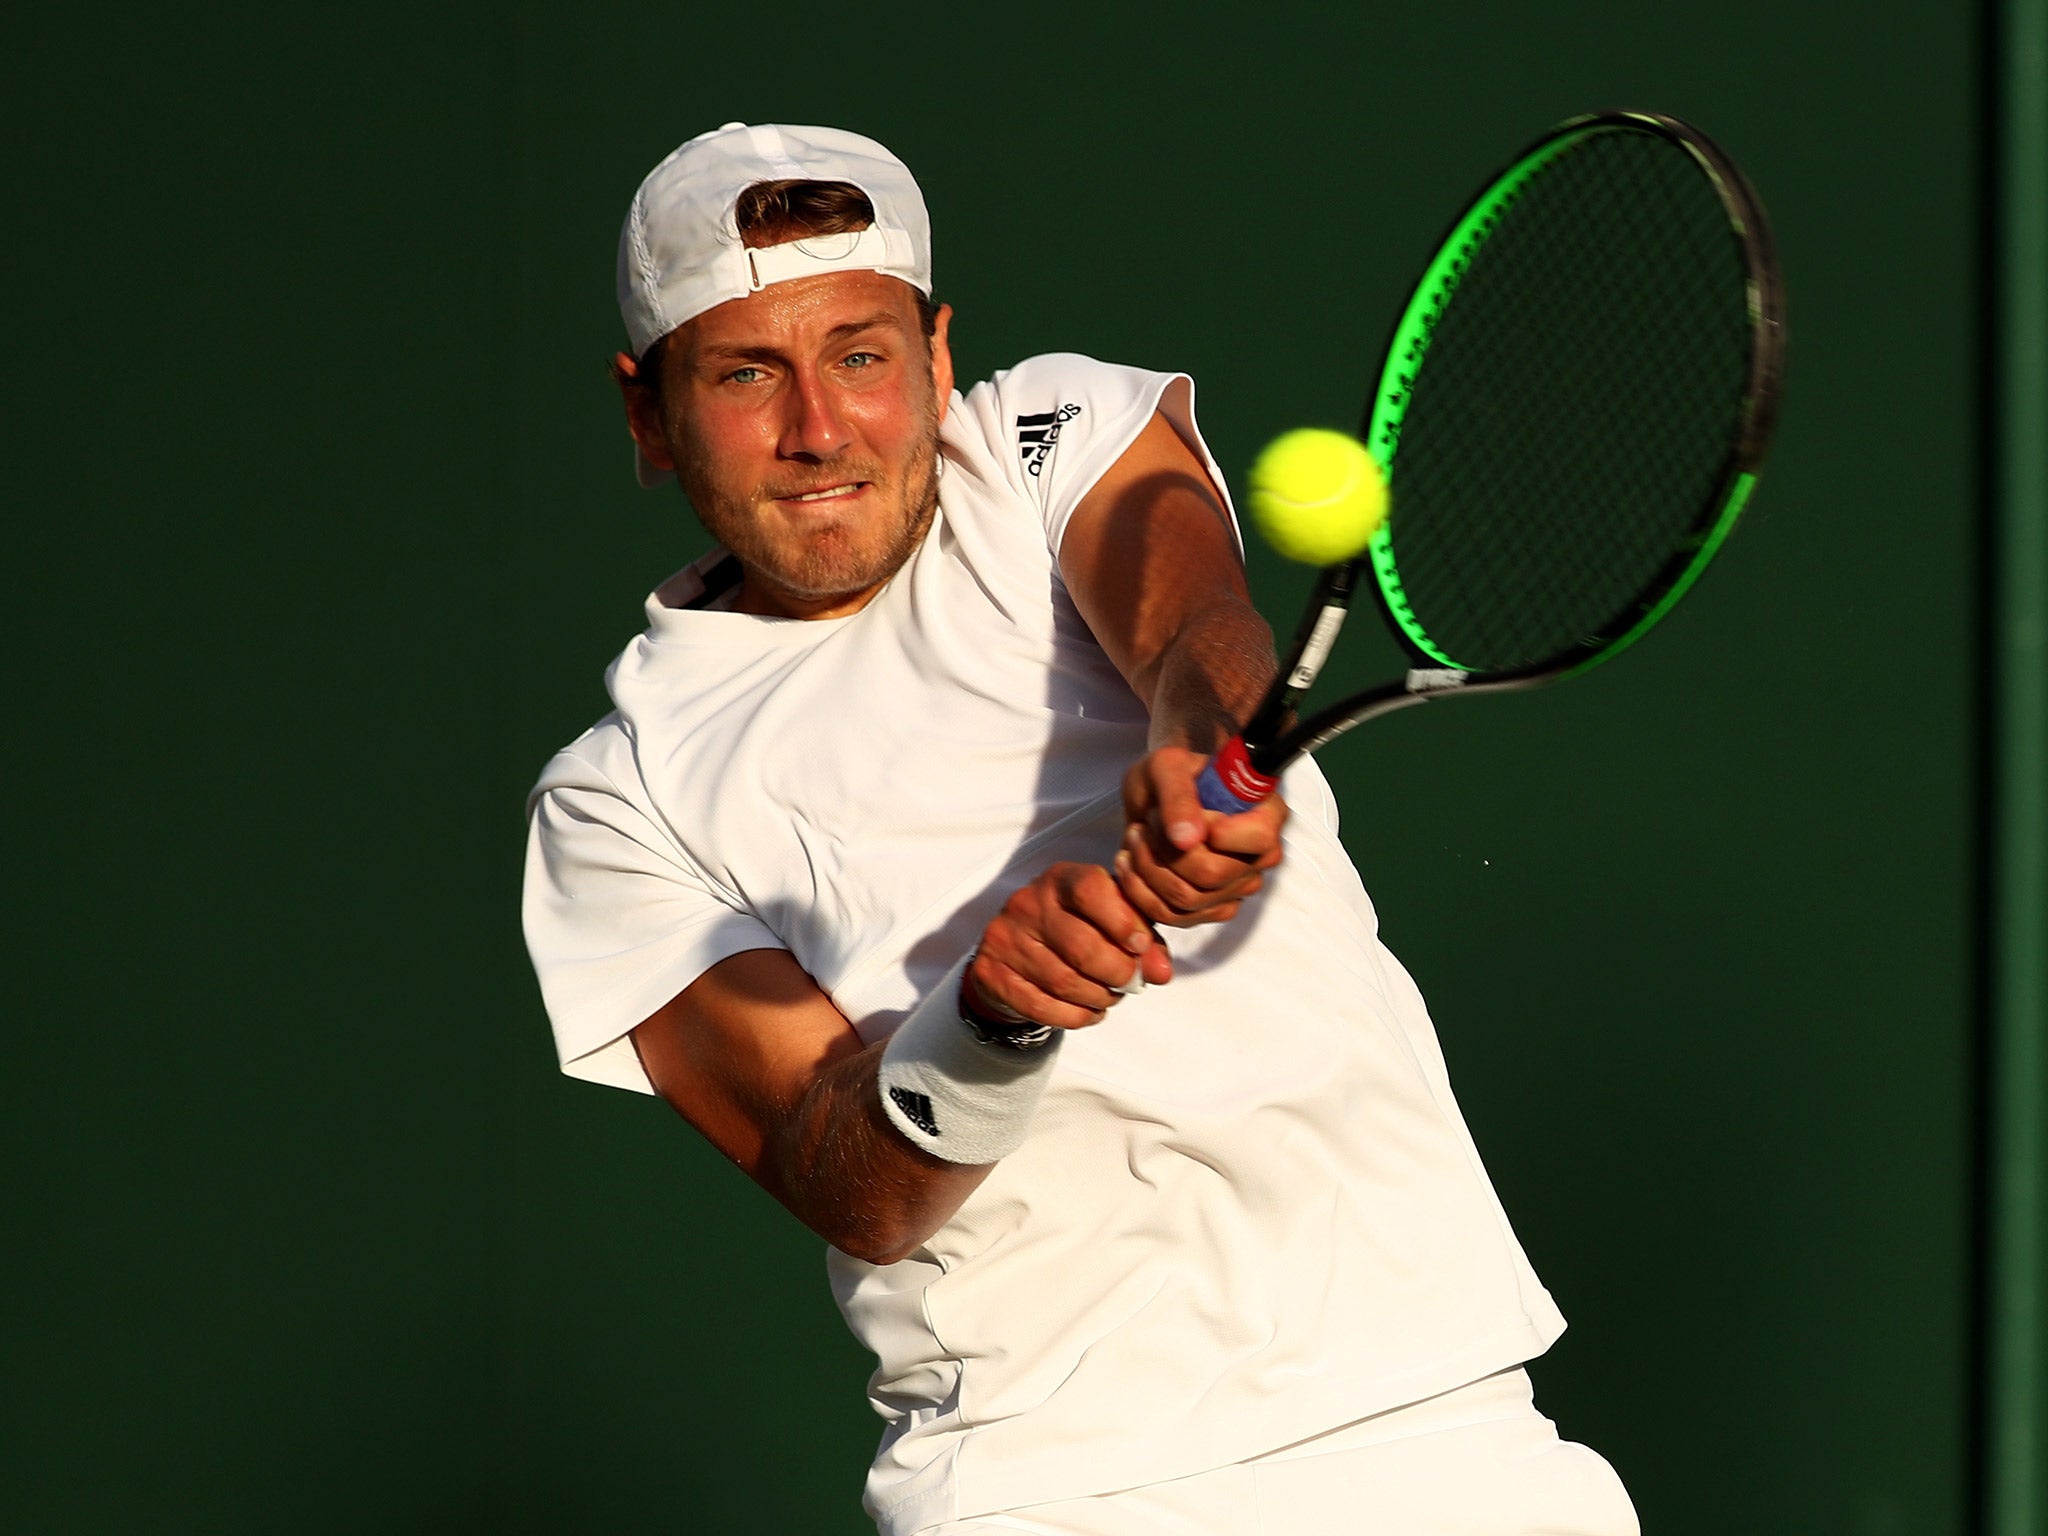 Lucas Pouille reached the fourth round at Wimbledon by beating Juan Martin Del Potro